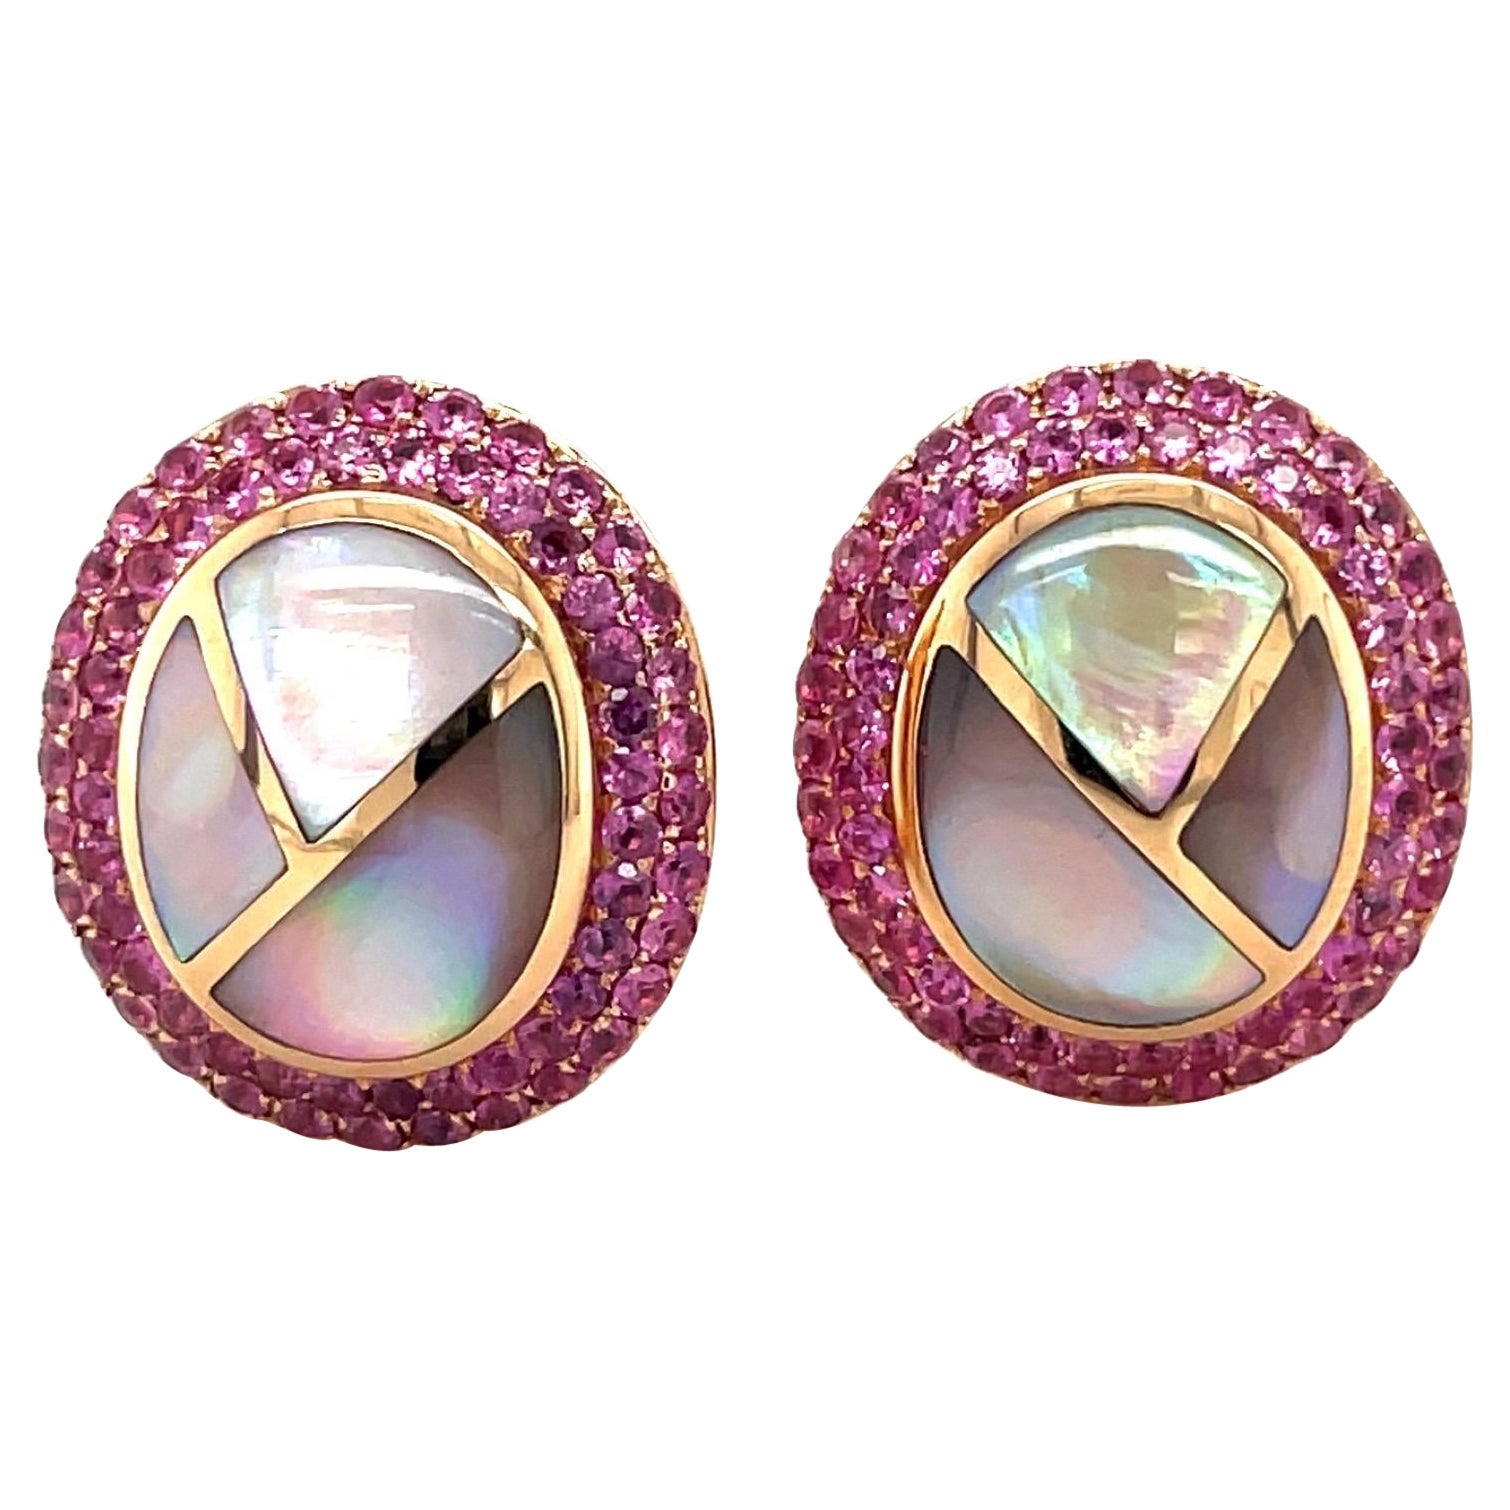 Asch Grossbardt 18KT RG Earrings 1.45CT Pink Sapphire & Pink Mother of Pearl For Sale